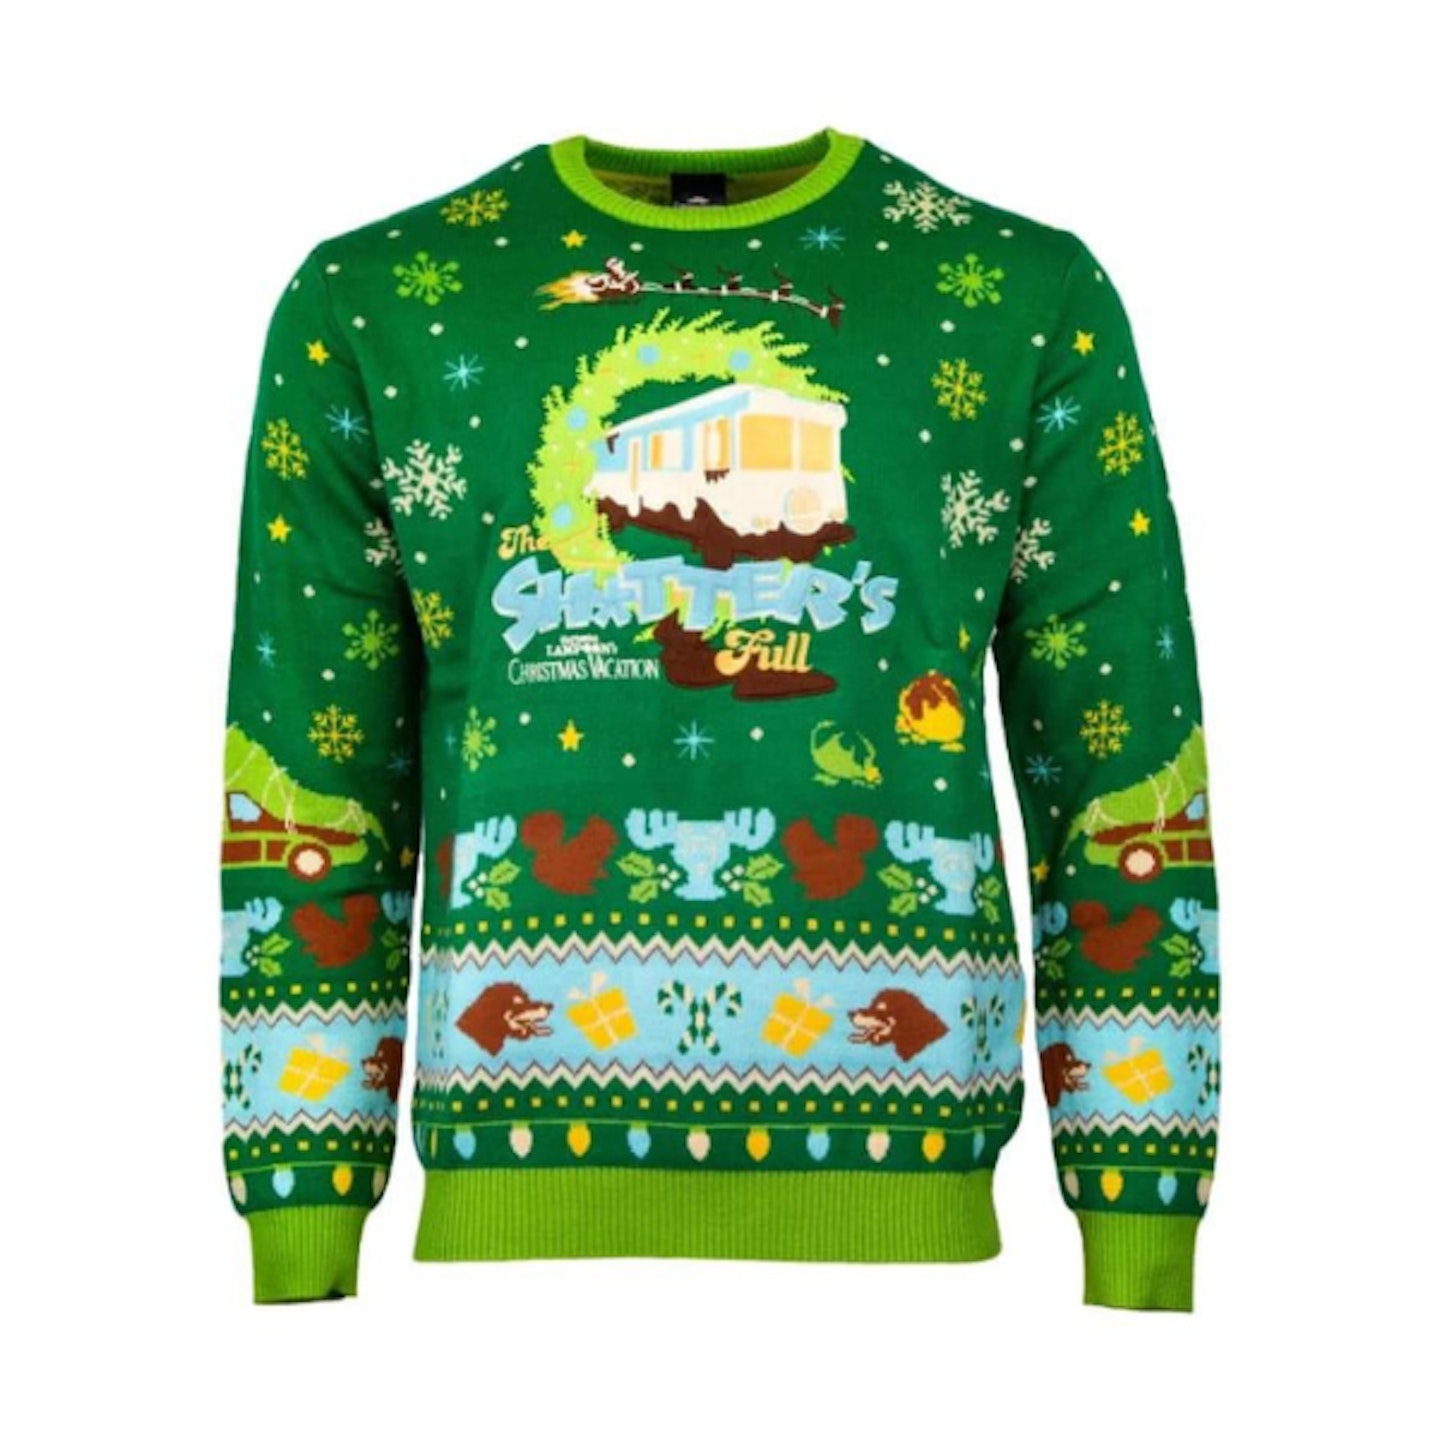 Official National Lampoon’s Christmas Vacation Christmas Jumper / Ugly Sweater